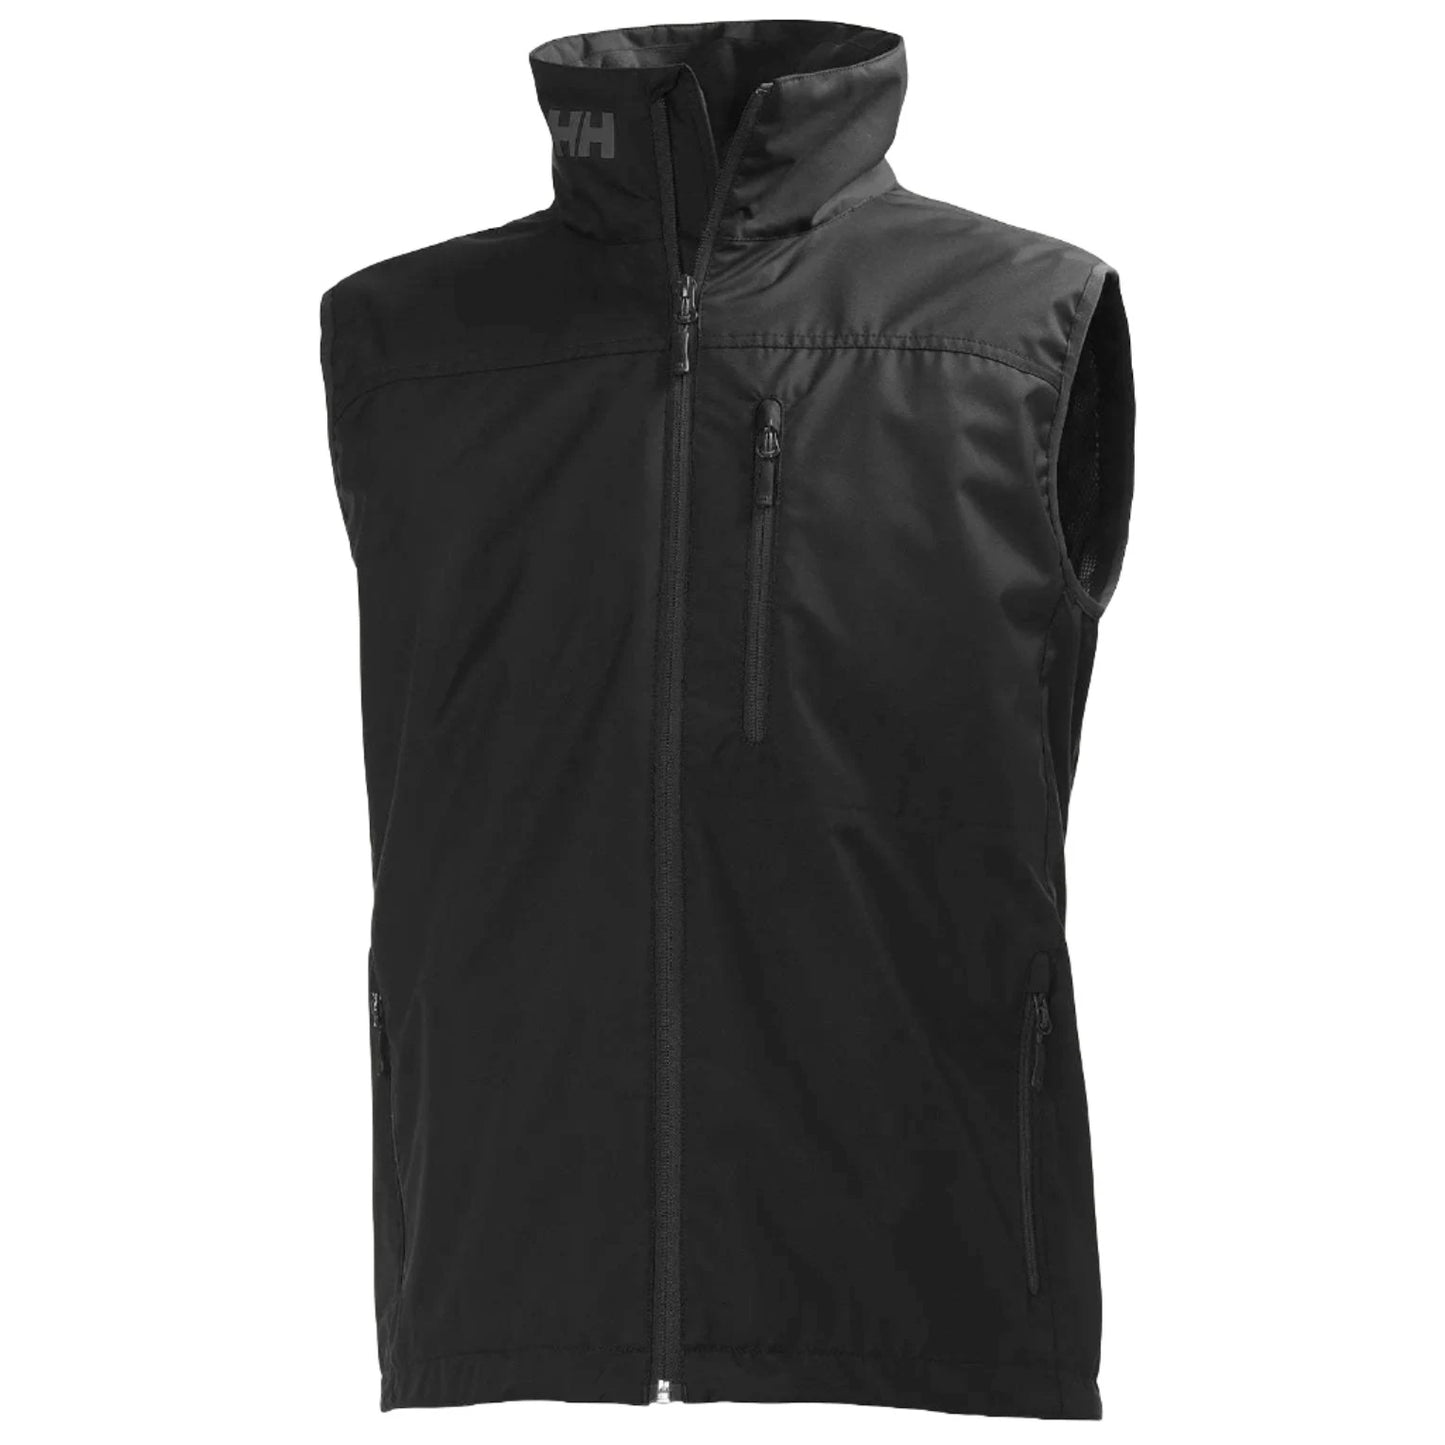 Helly Hansen Men's Crew Sailing Vest - The Luxury Promotional Gifts Company Limited